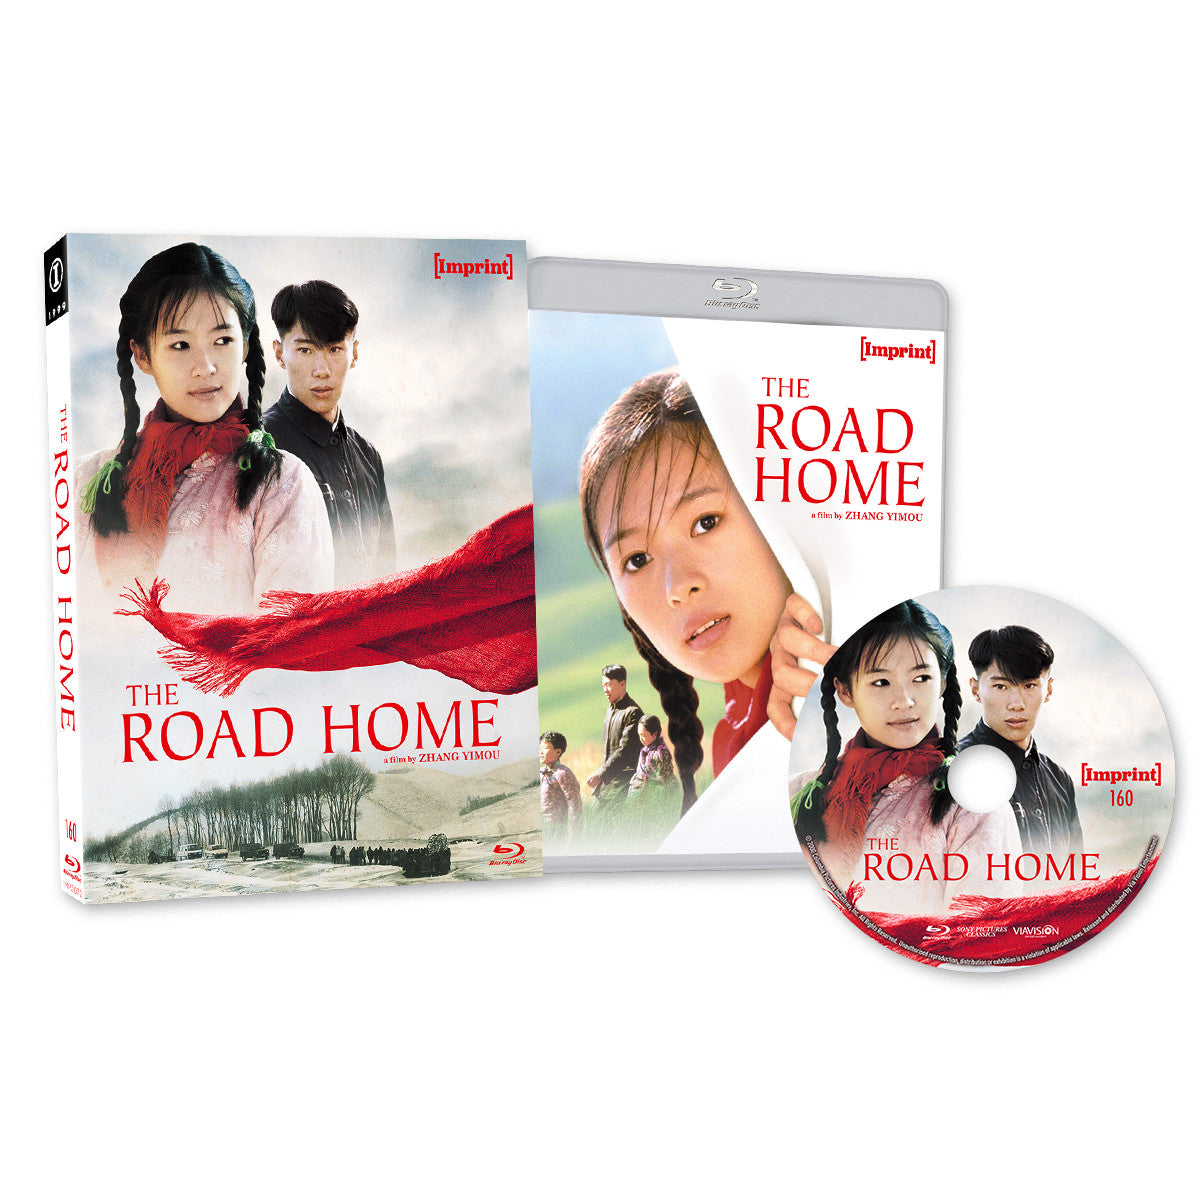 The Road Home (Imprint #160 Special Edition) Blu-Ray